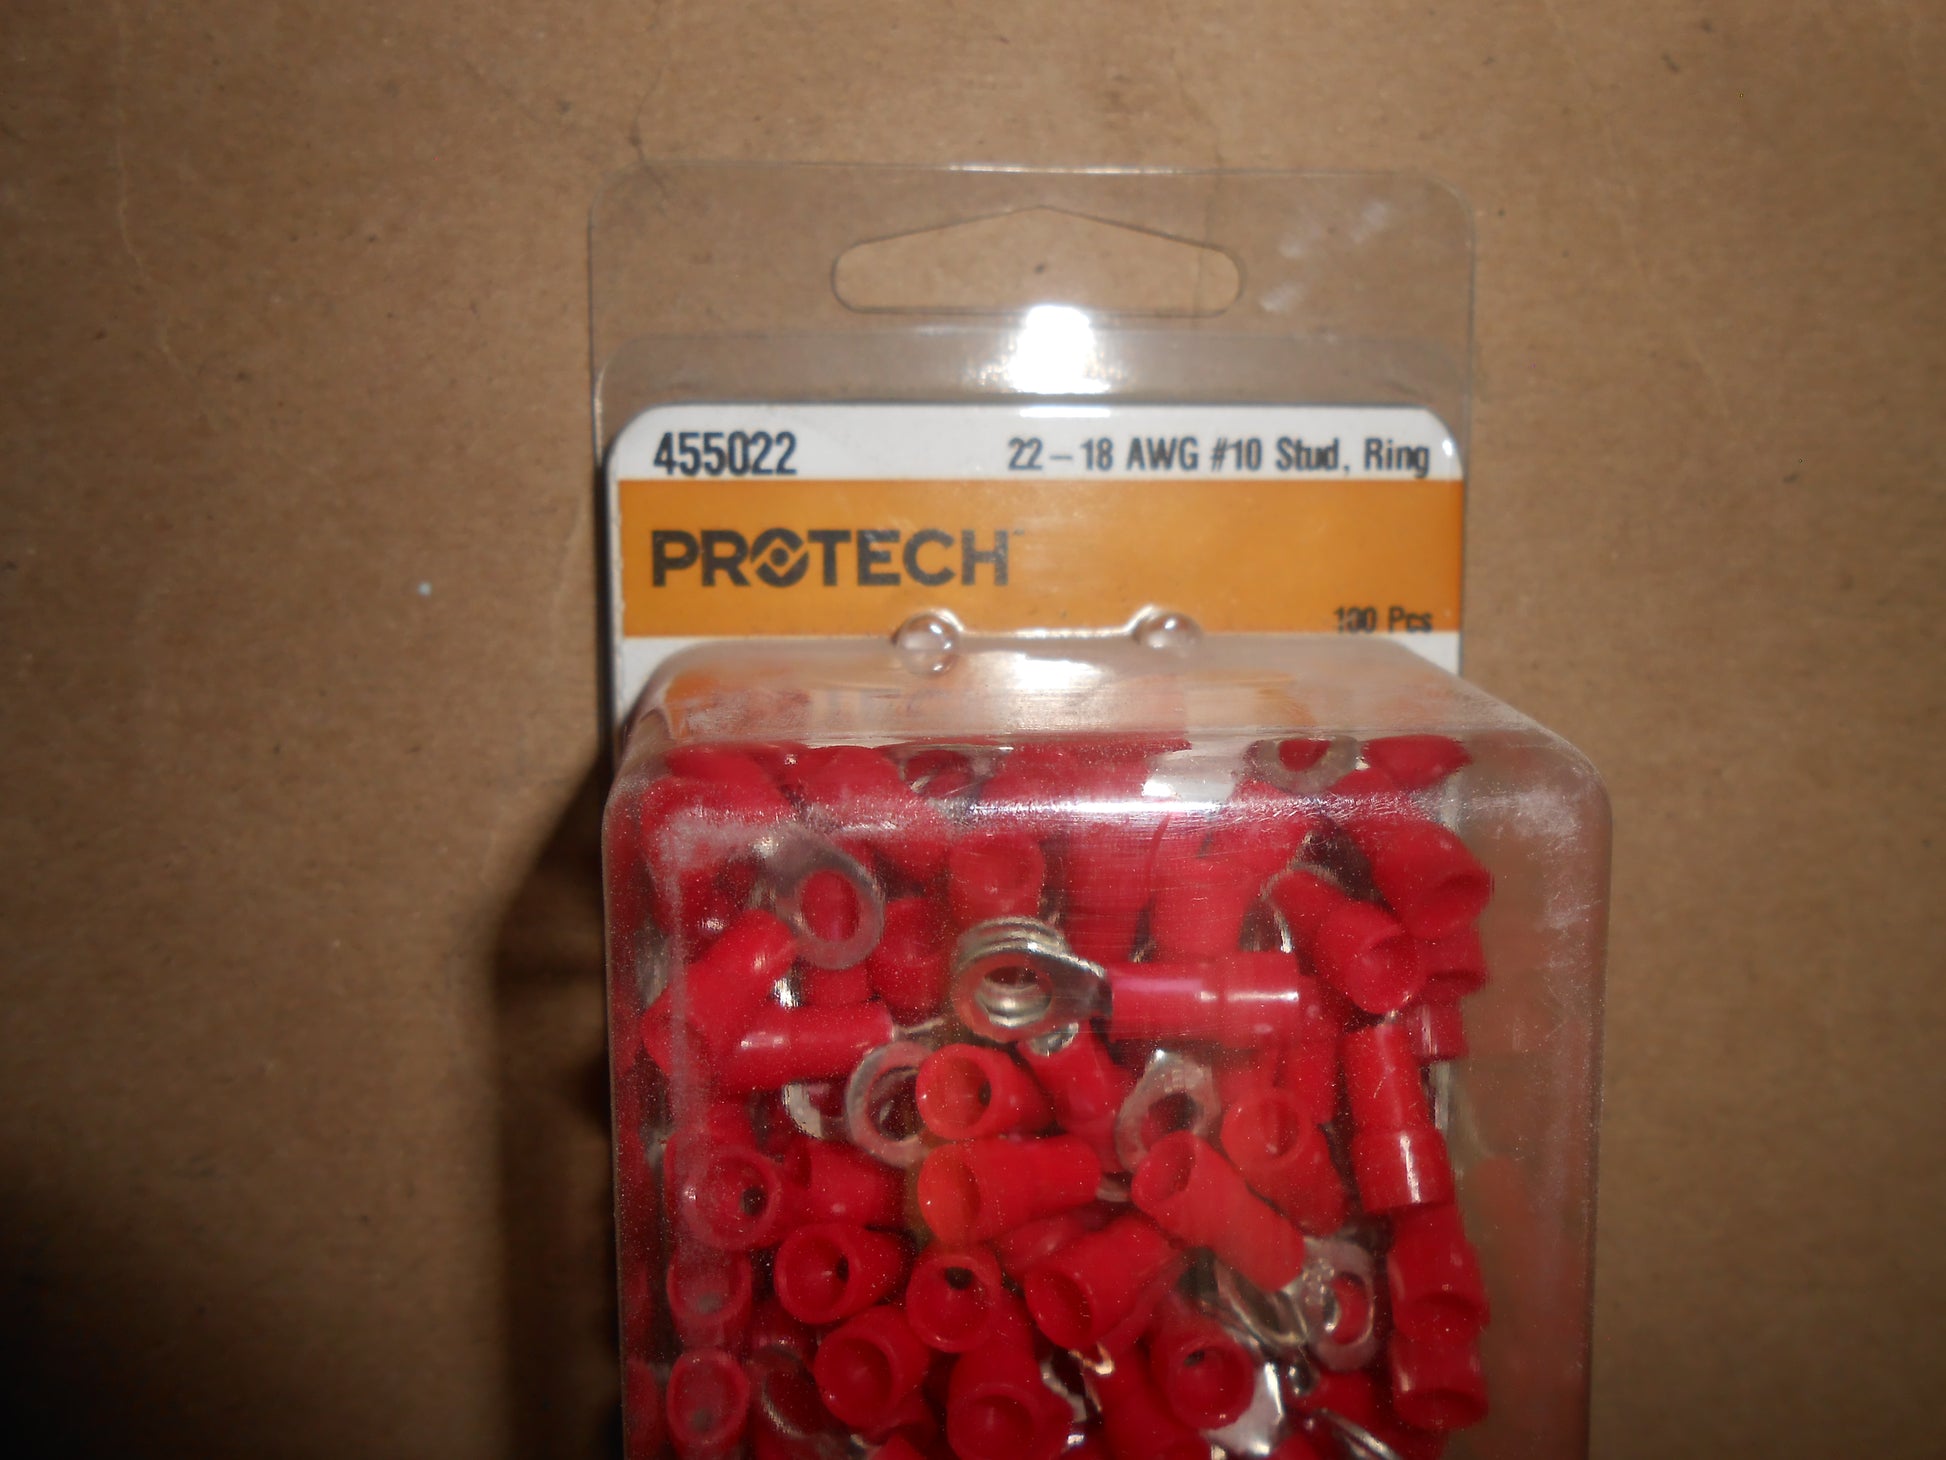 22 - 18 AWG #10 STUD TERMINAL RINGS - INSULATED - PACK OF 100